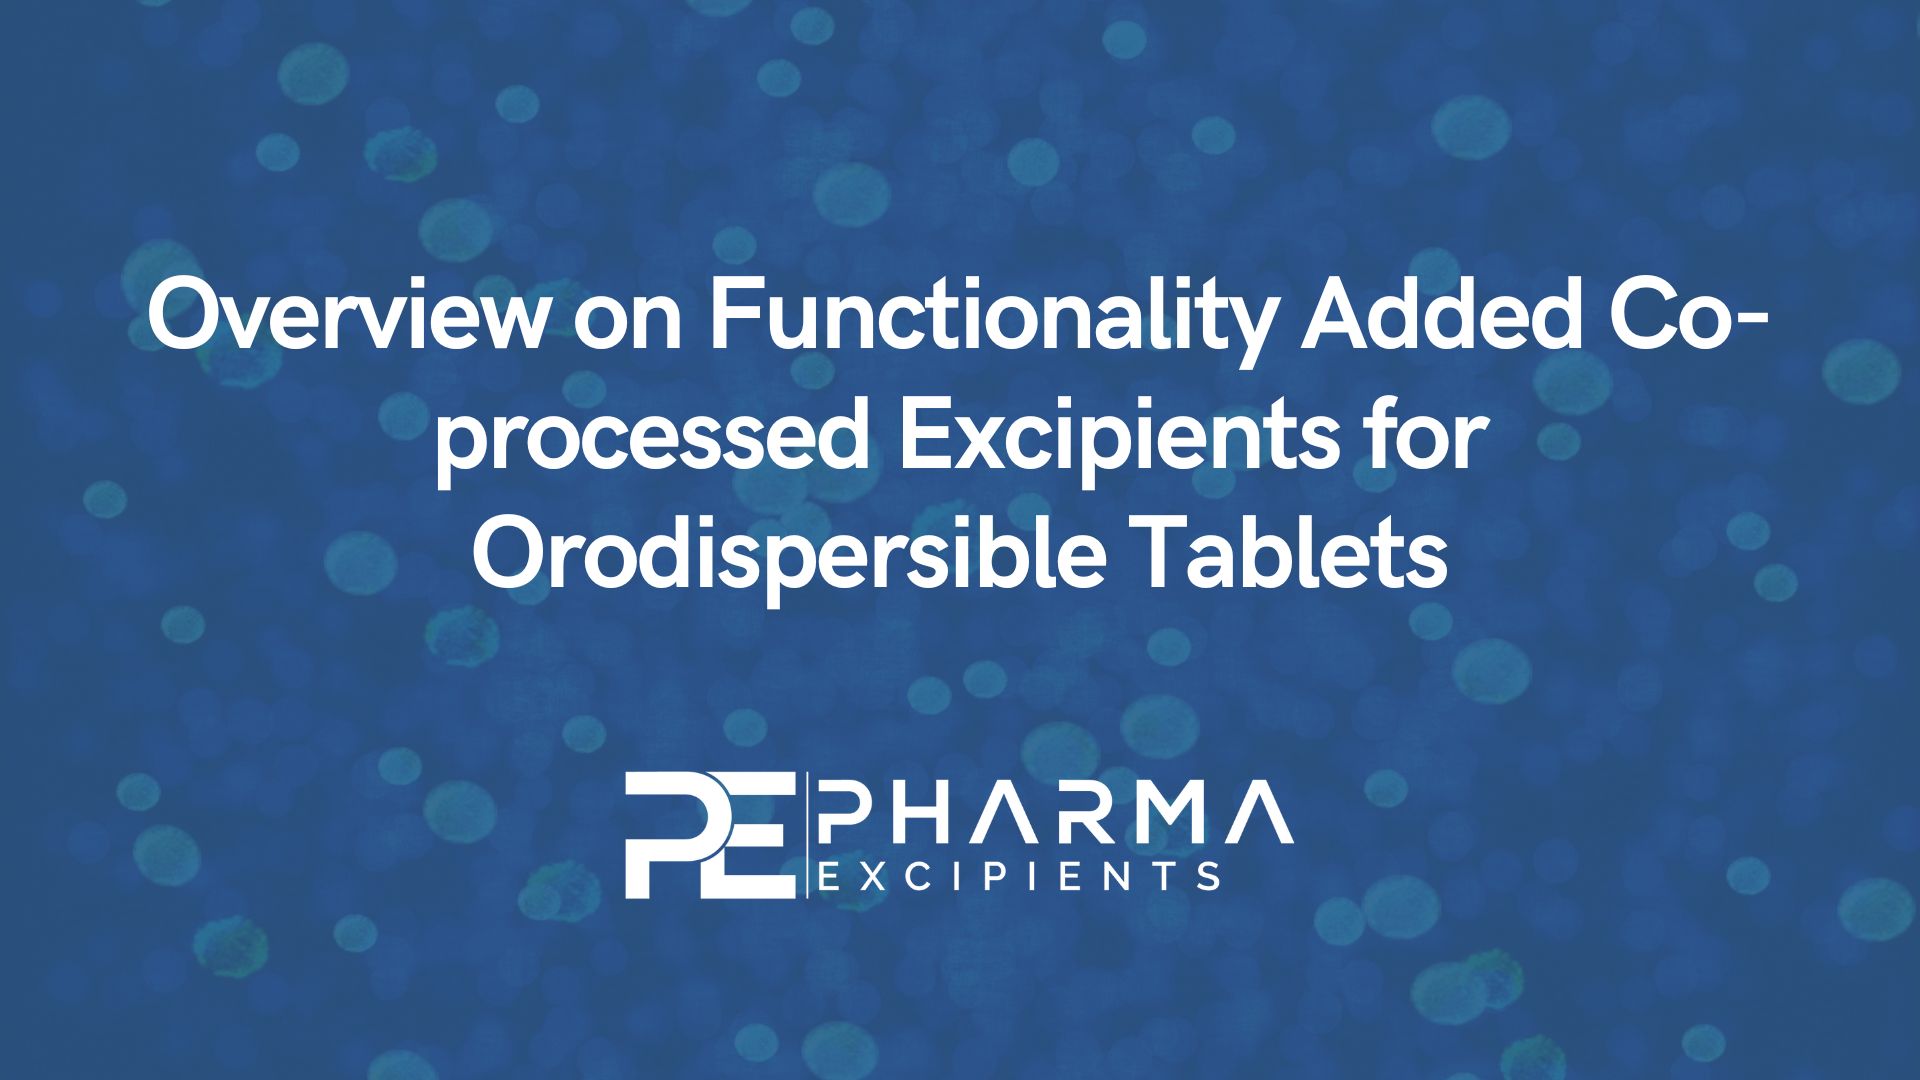 Overview on Functionality Added Co-processed Excipients for Orodispersible Tablets